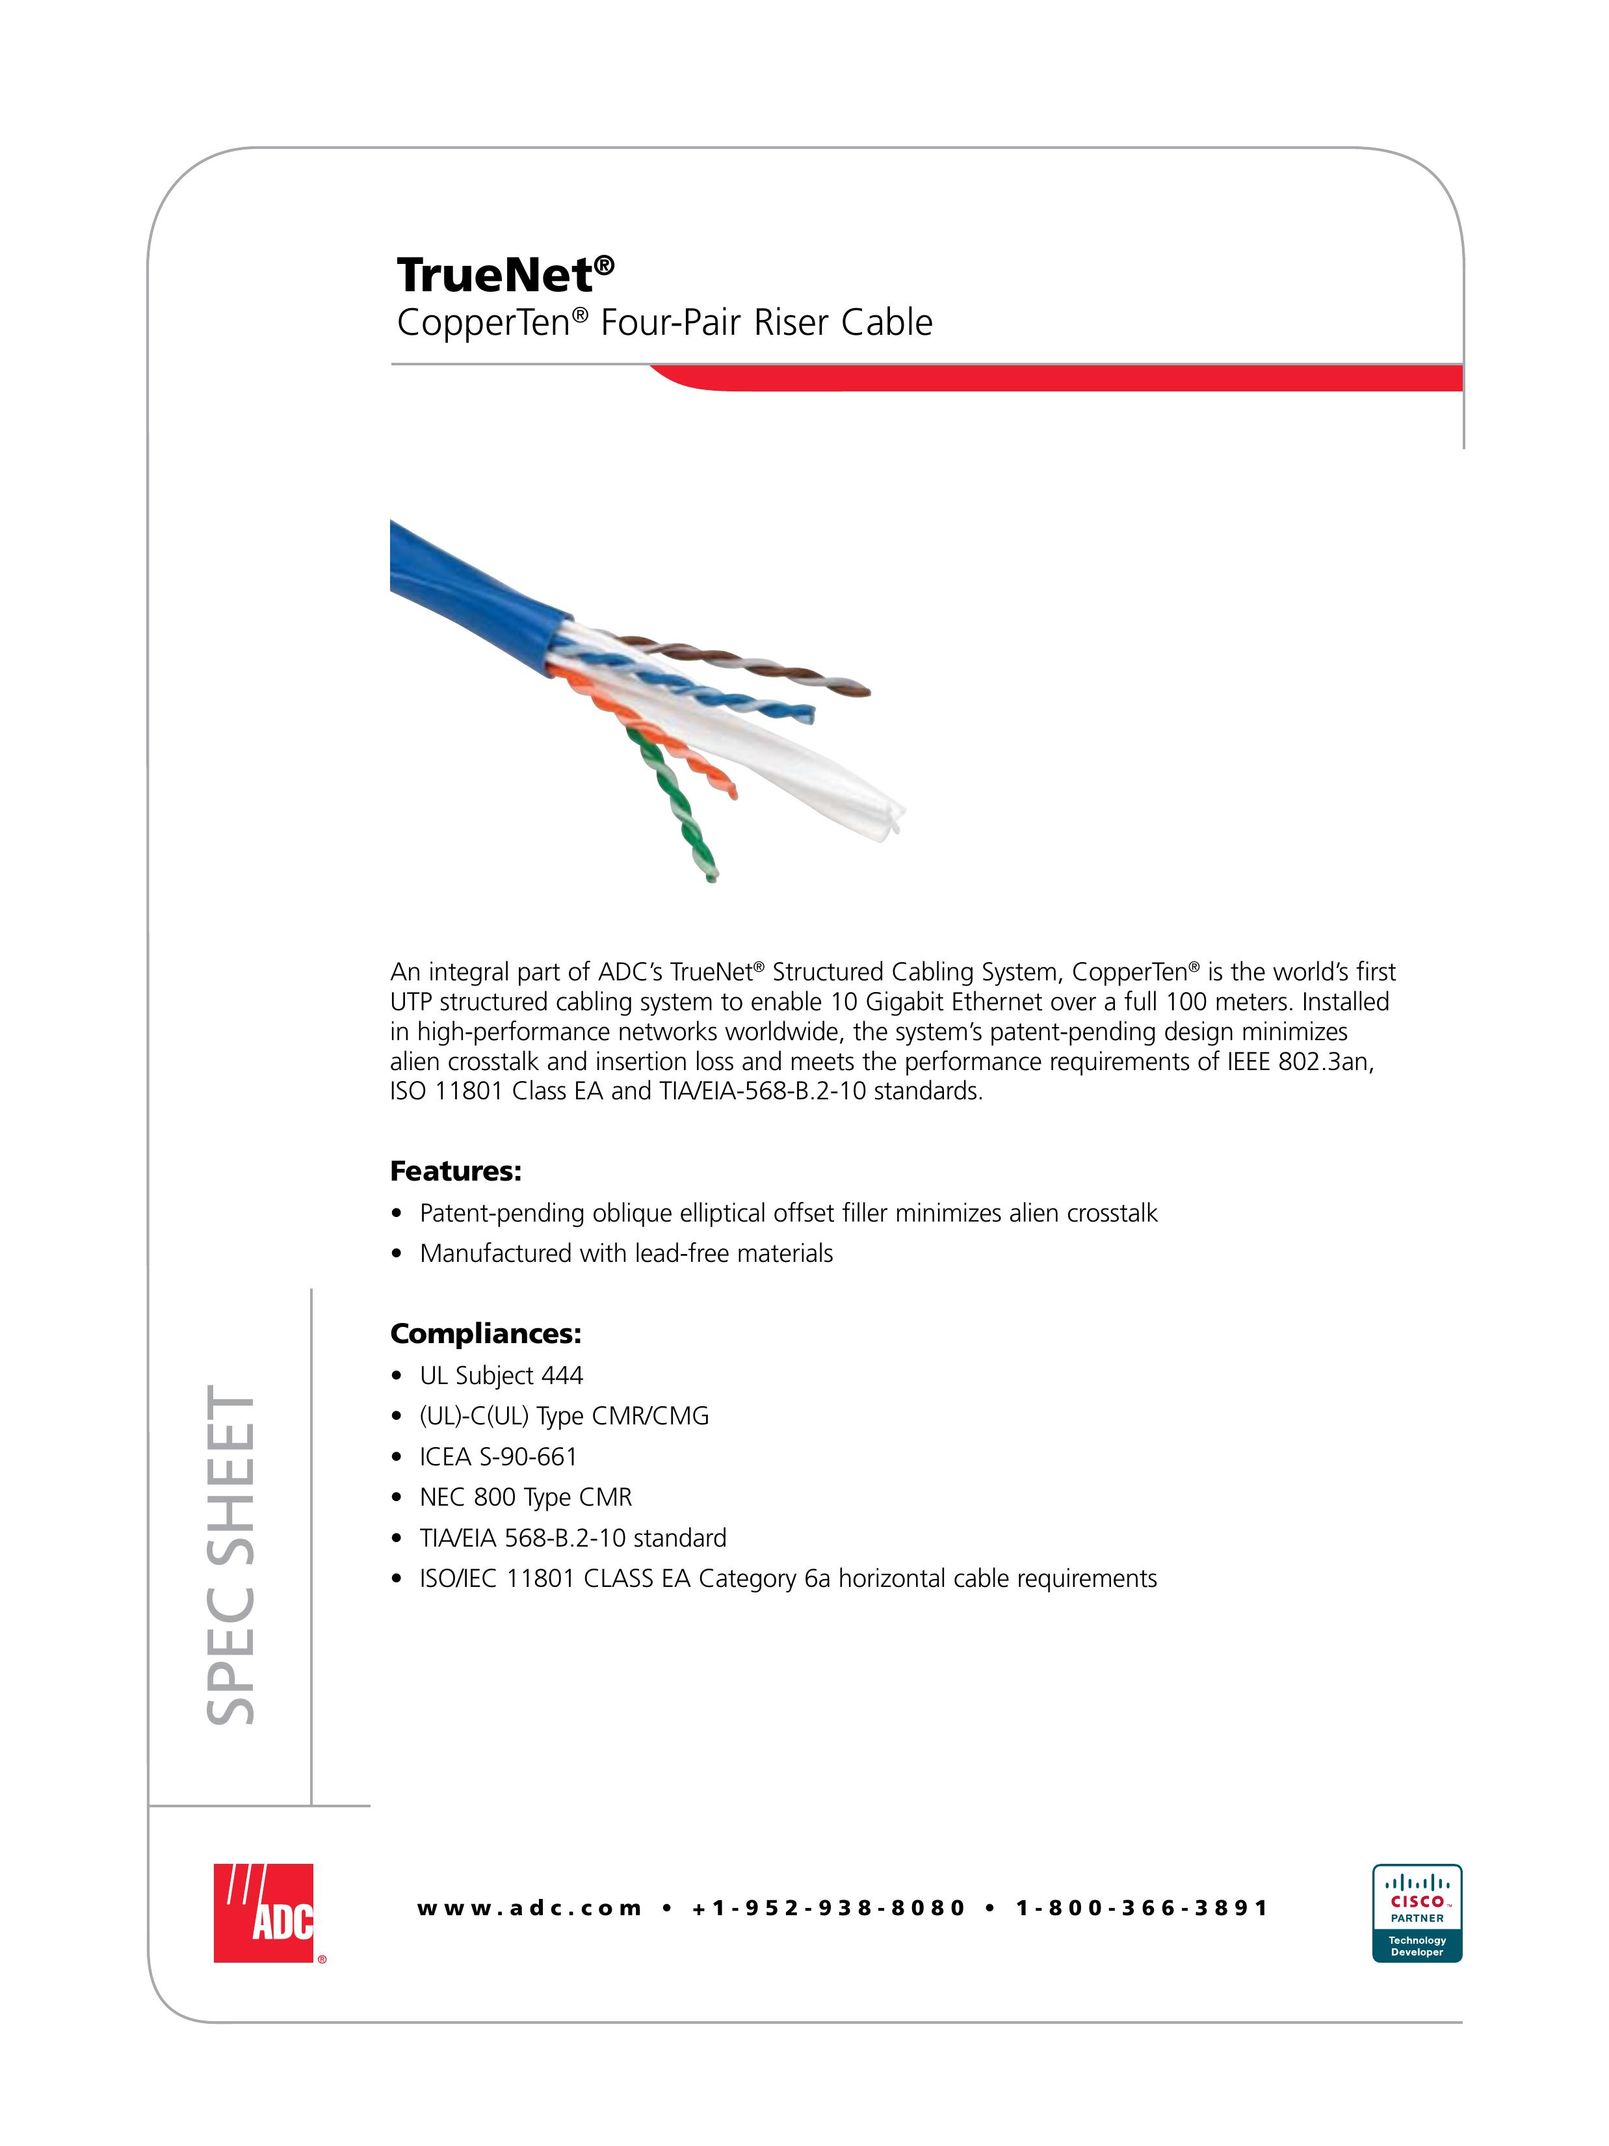 ADC Four-Pair Riser Cable Network Router User Manual